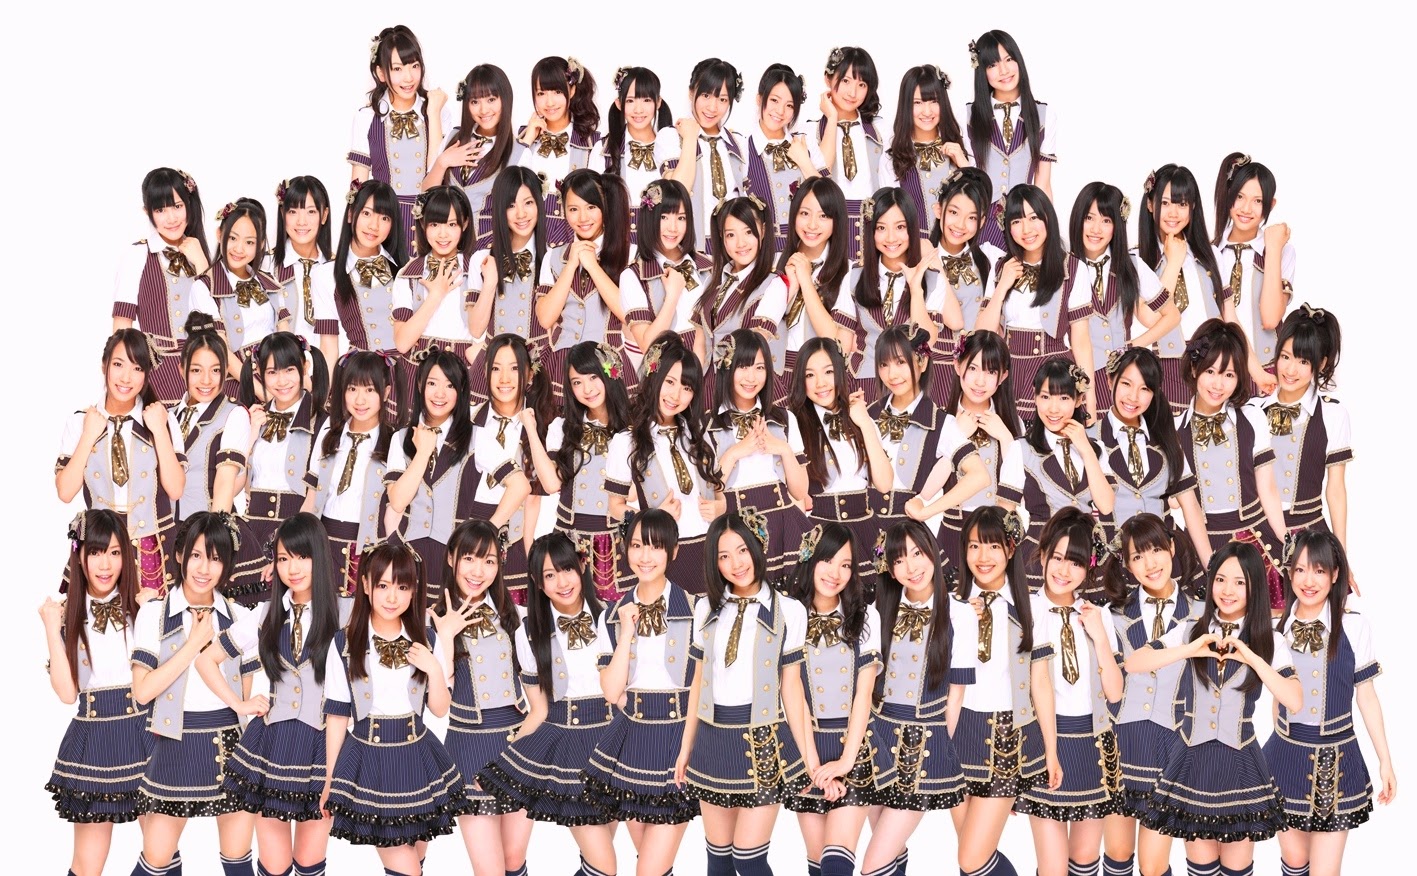 AKB48: The Surprising Truth Behind the World's Biggest Band